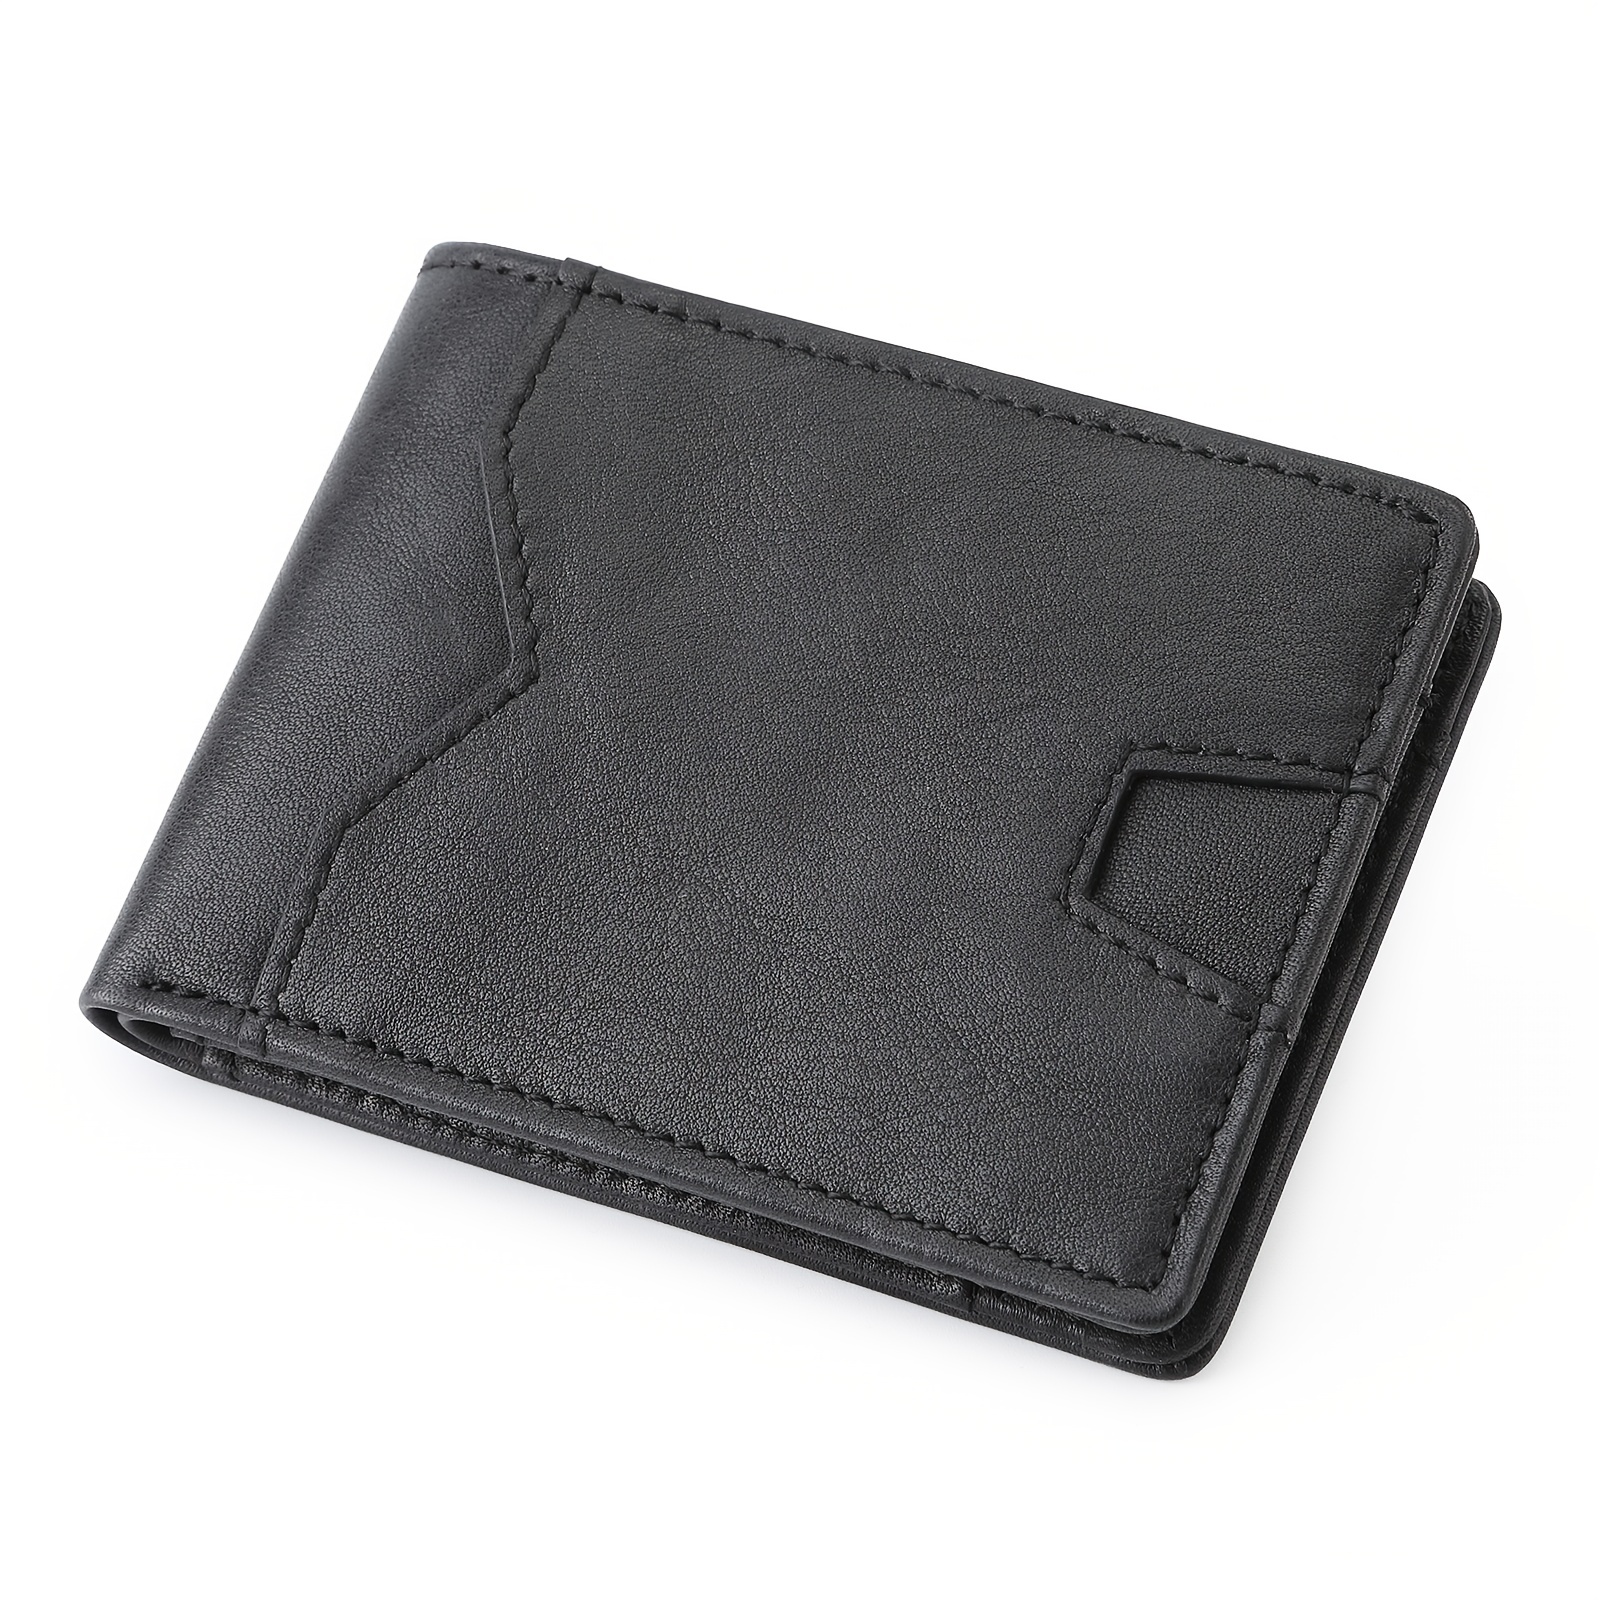 Marshal Wallet Leather Credit Card Holder Wallet for Men and Women, Thin Bifold RFID Blocking Wallet, Slim Front Pocket Minimalist Wallet, Small Card